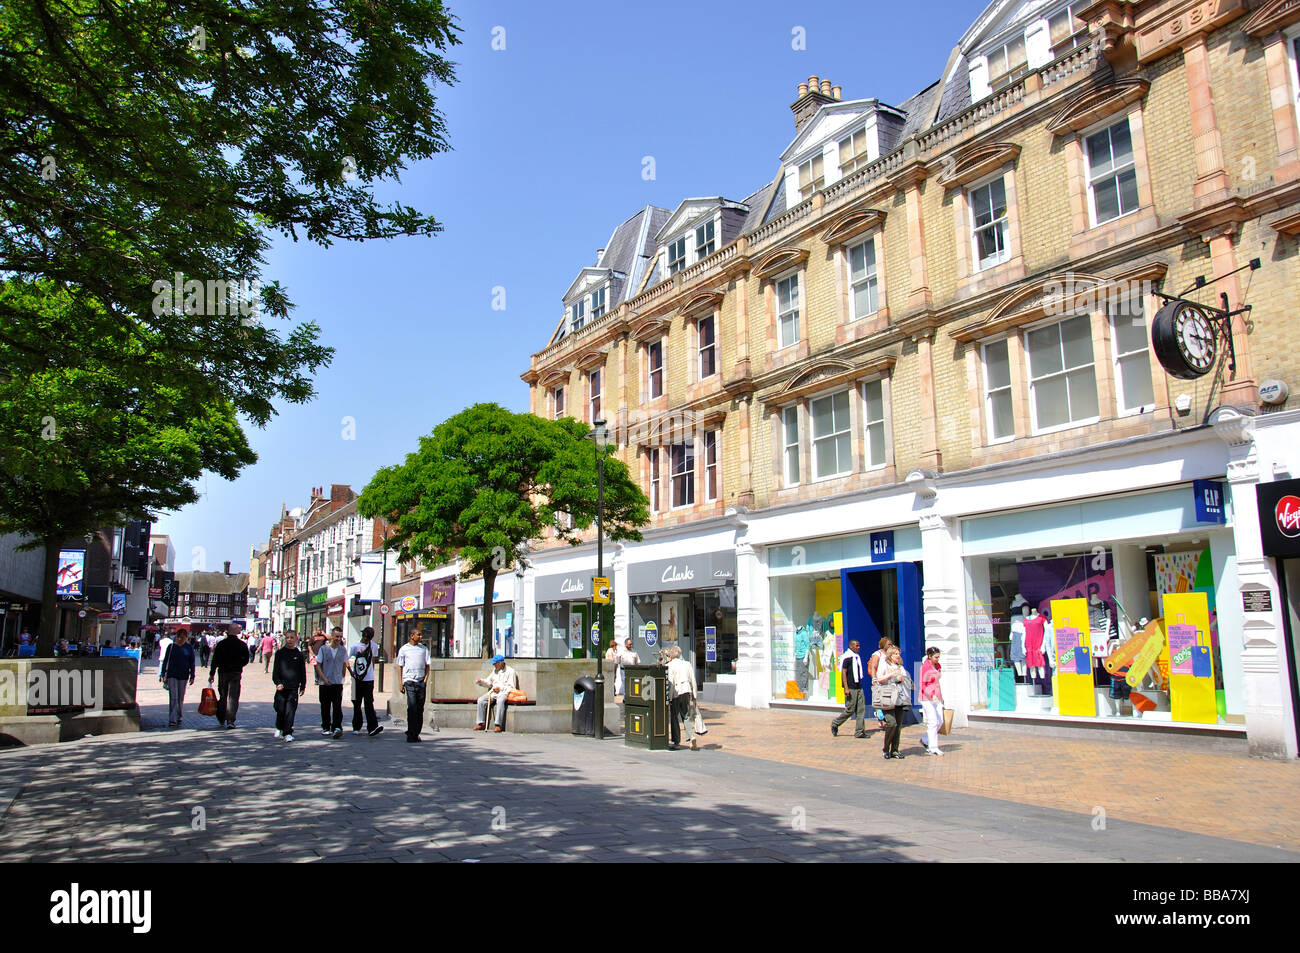 High street, Bromley, London Borough of Bromley, Greater London, England, Regno Unito Foto Stock